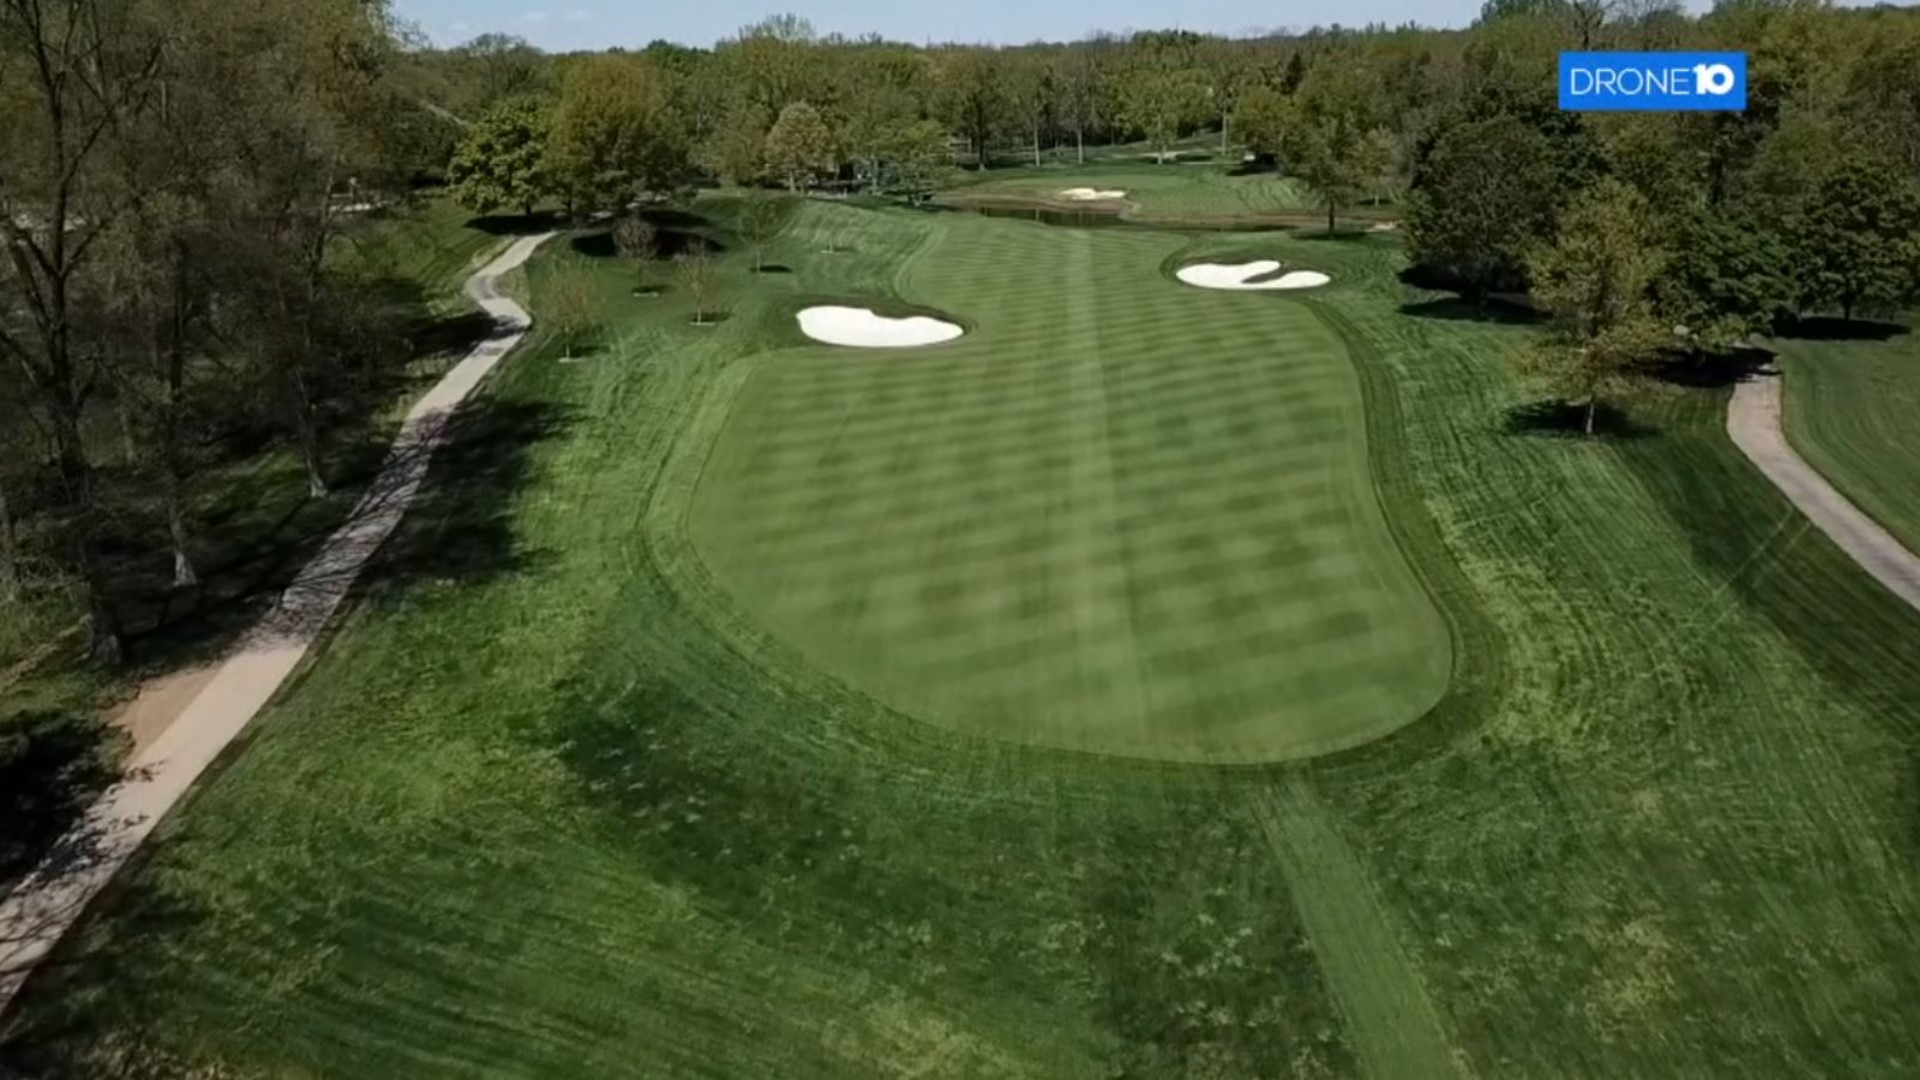 Home of the Memorial Tournament, Muirfield Village Golf Club was the dream and work of Jack Nicklaus. The golf course is situated on 220 acres.